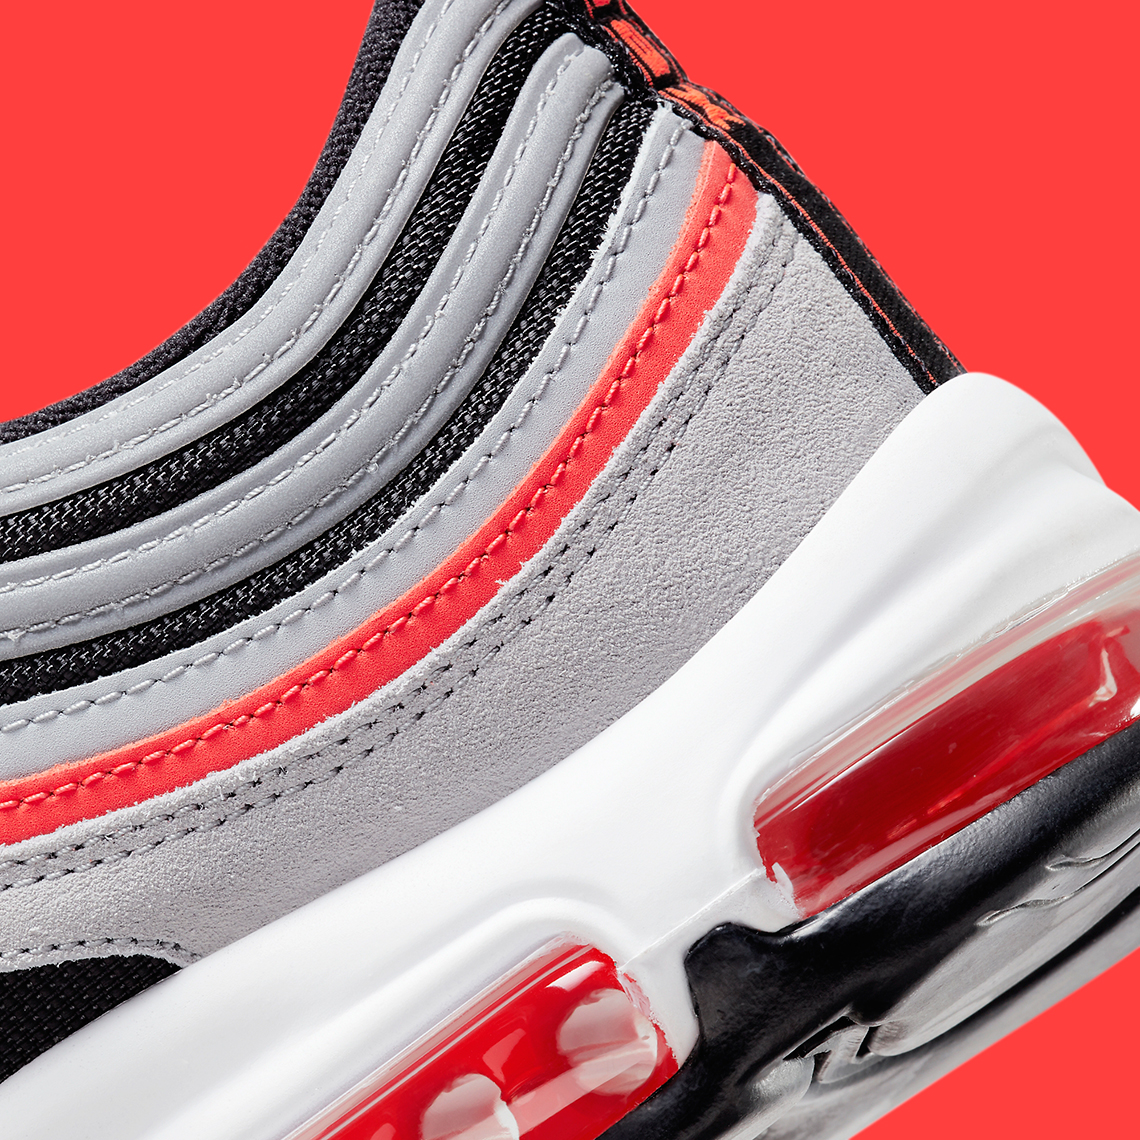 Nike Air Max 97 Wold Grey Radiant Red Black White Db4611 002 1